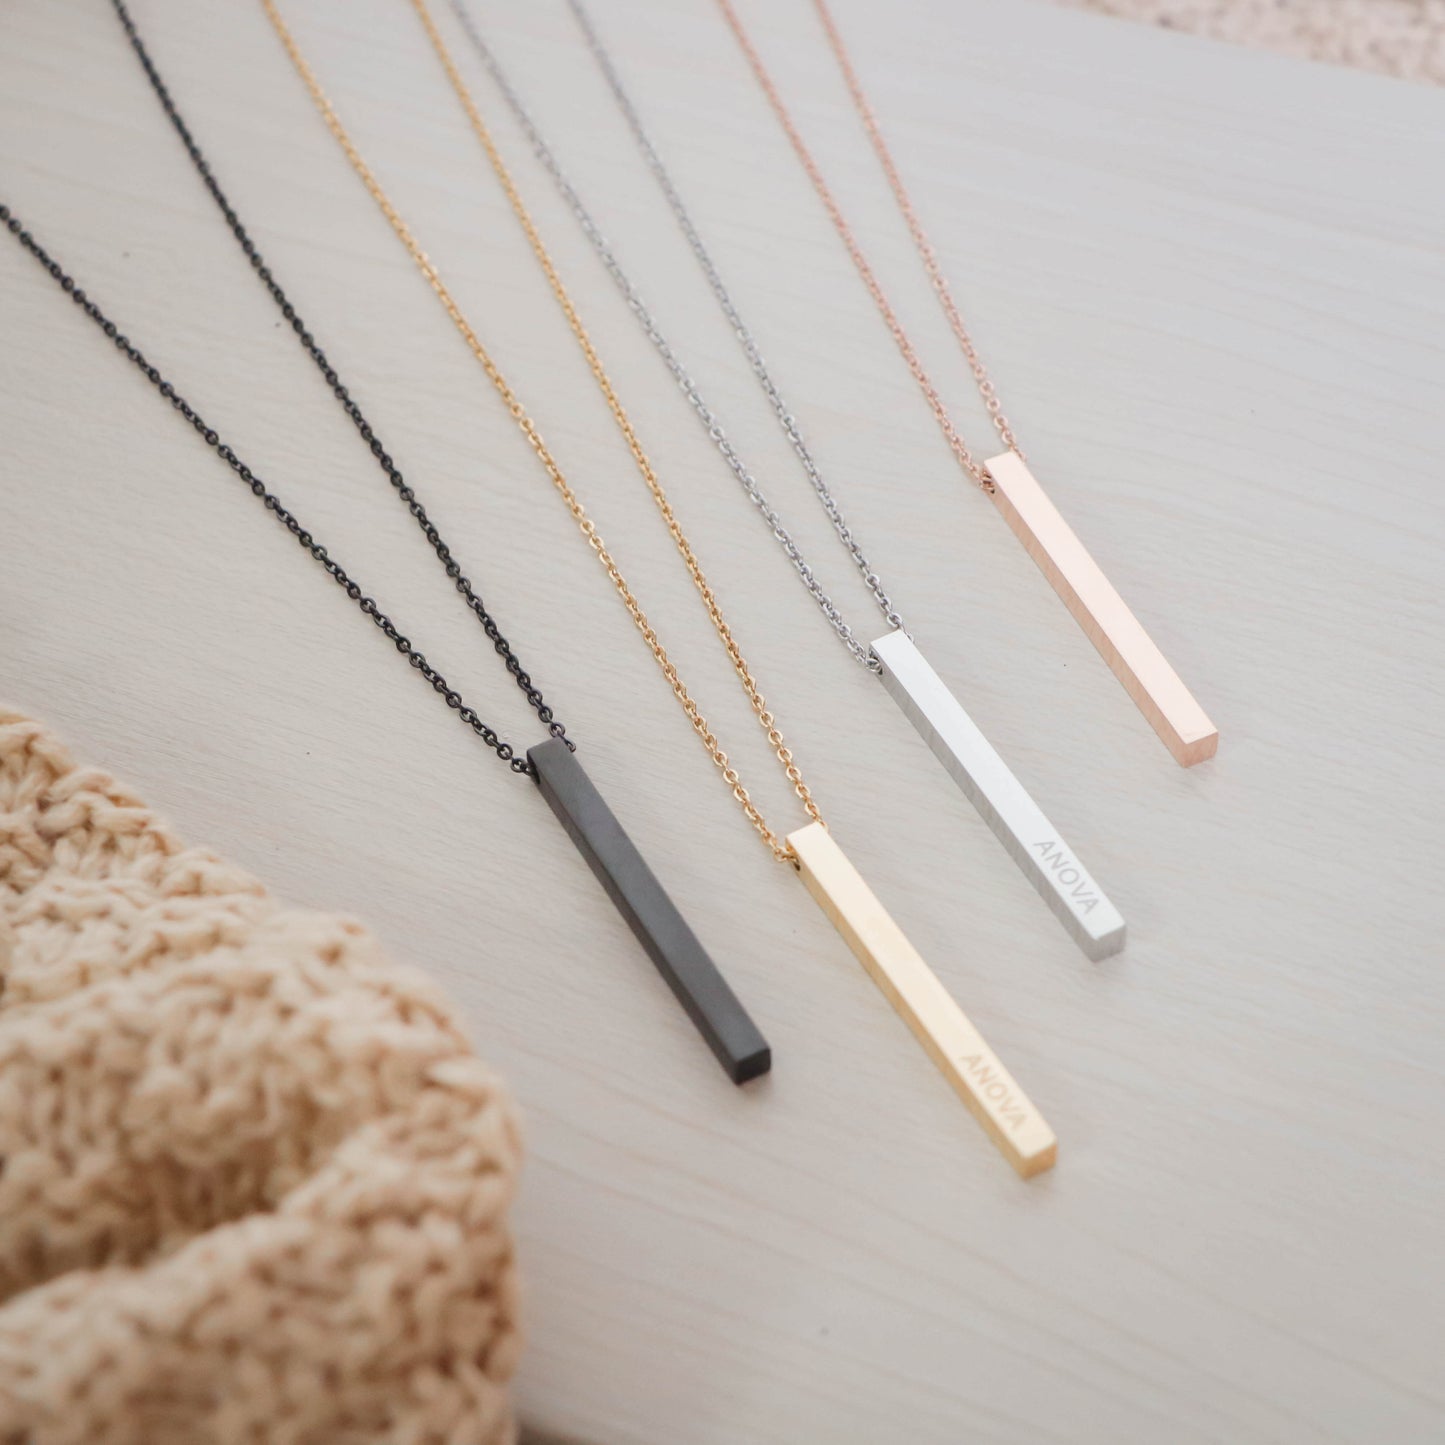 Personalized BAR Necklace (Buy 2 Take 1 FREE)